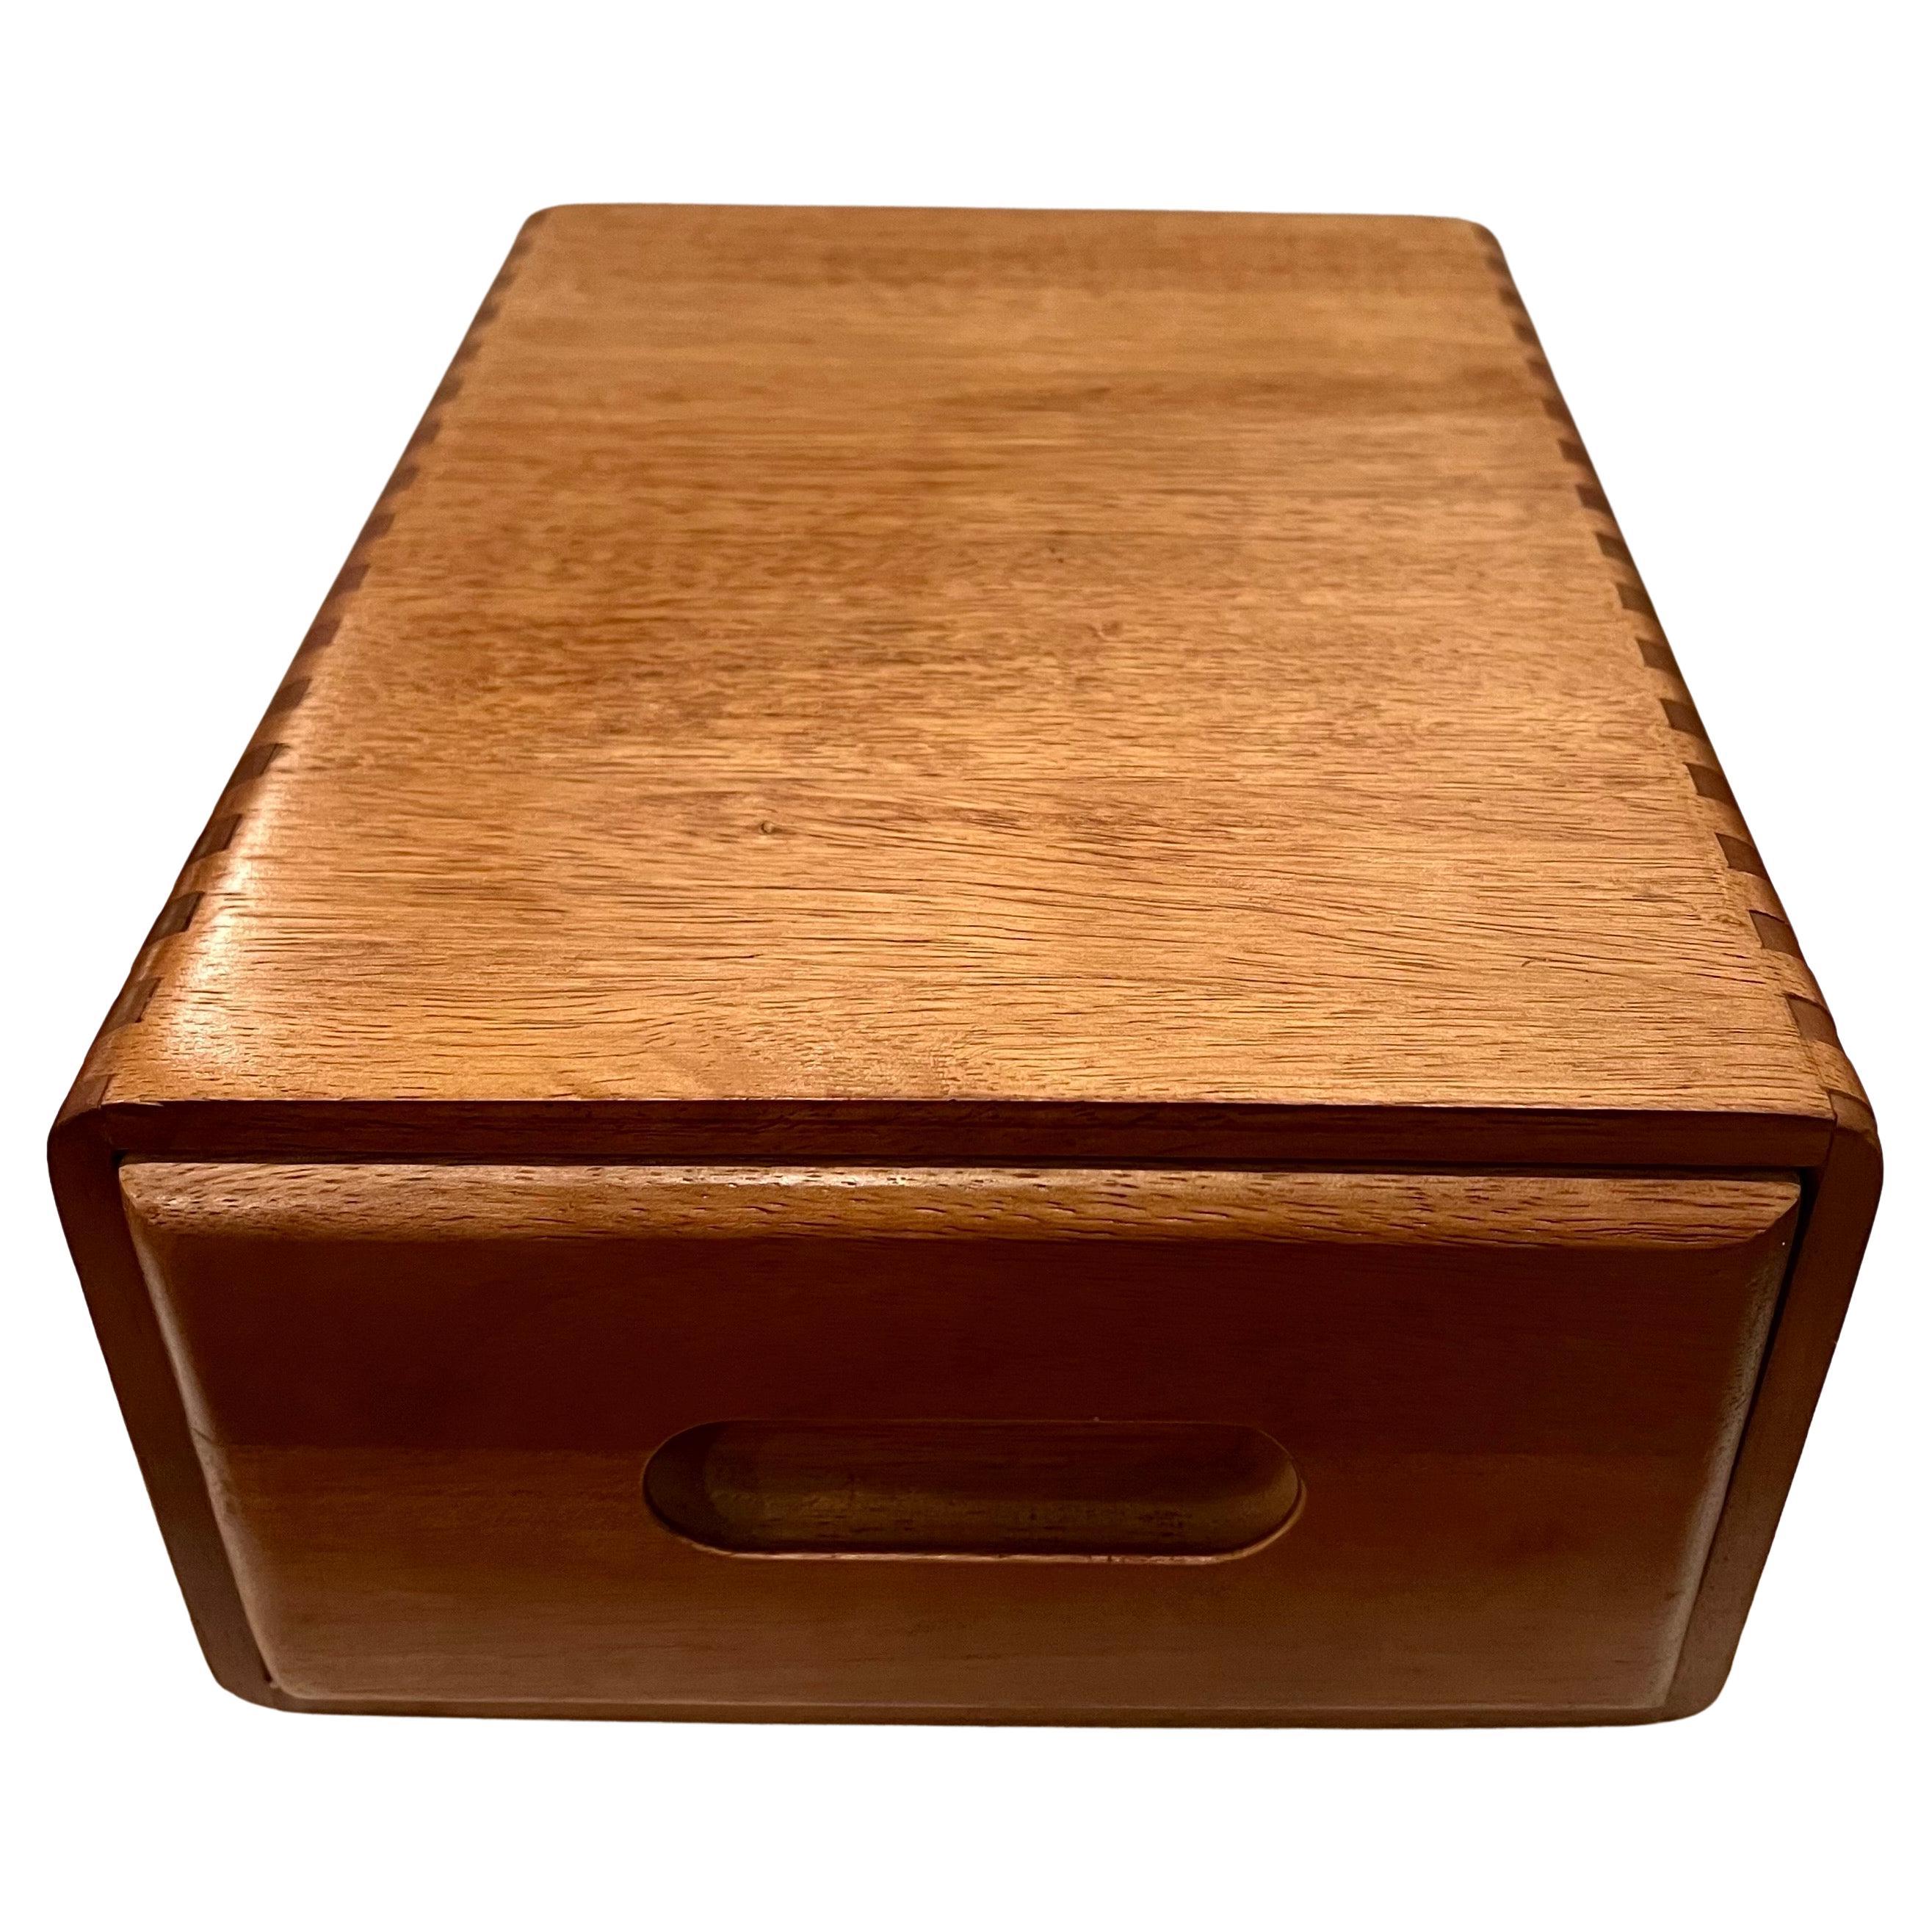 20th Century Danish Modern Solid Teak Dovetail Multiuse Box with Drawer For Sale